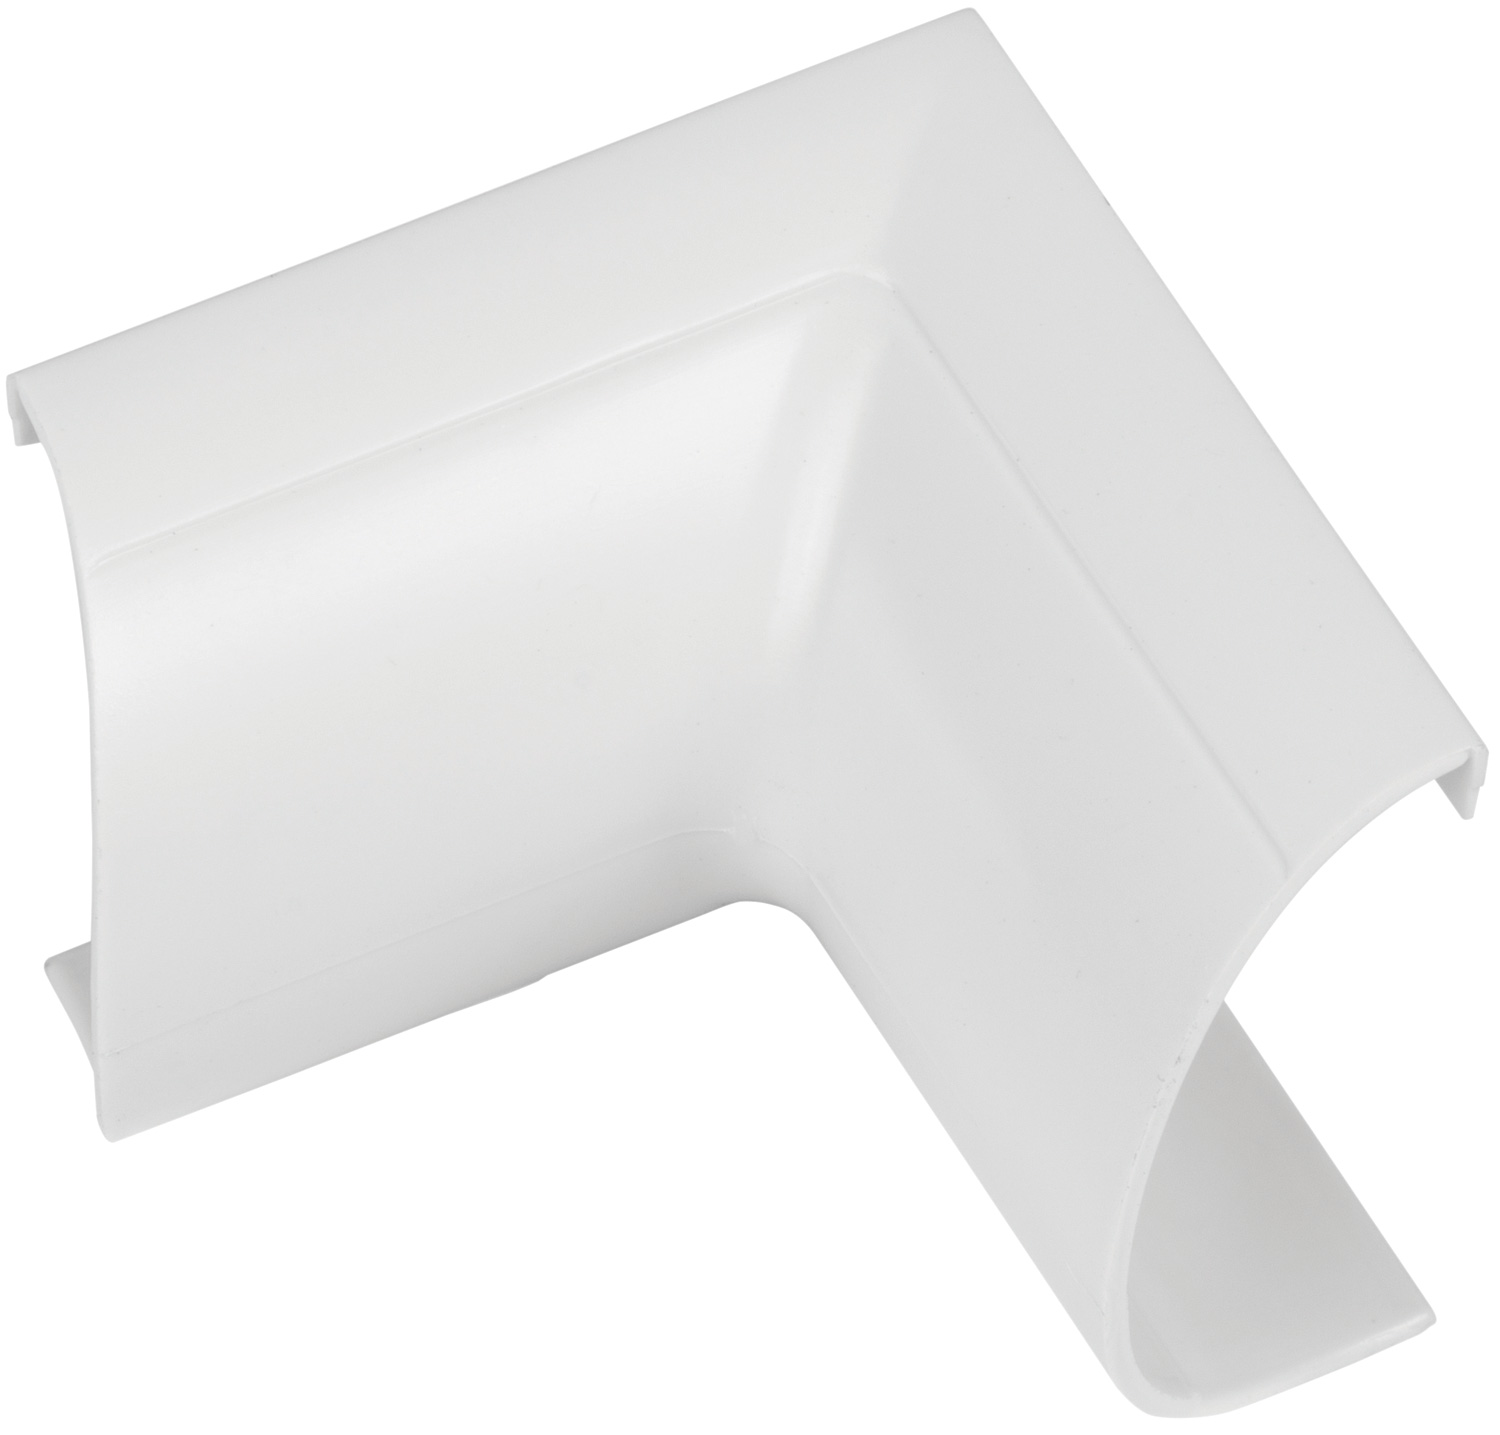 Clip-over trunking accessories 30x15 Clip-Over white Internal Bend 30x15mm Bag of 5